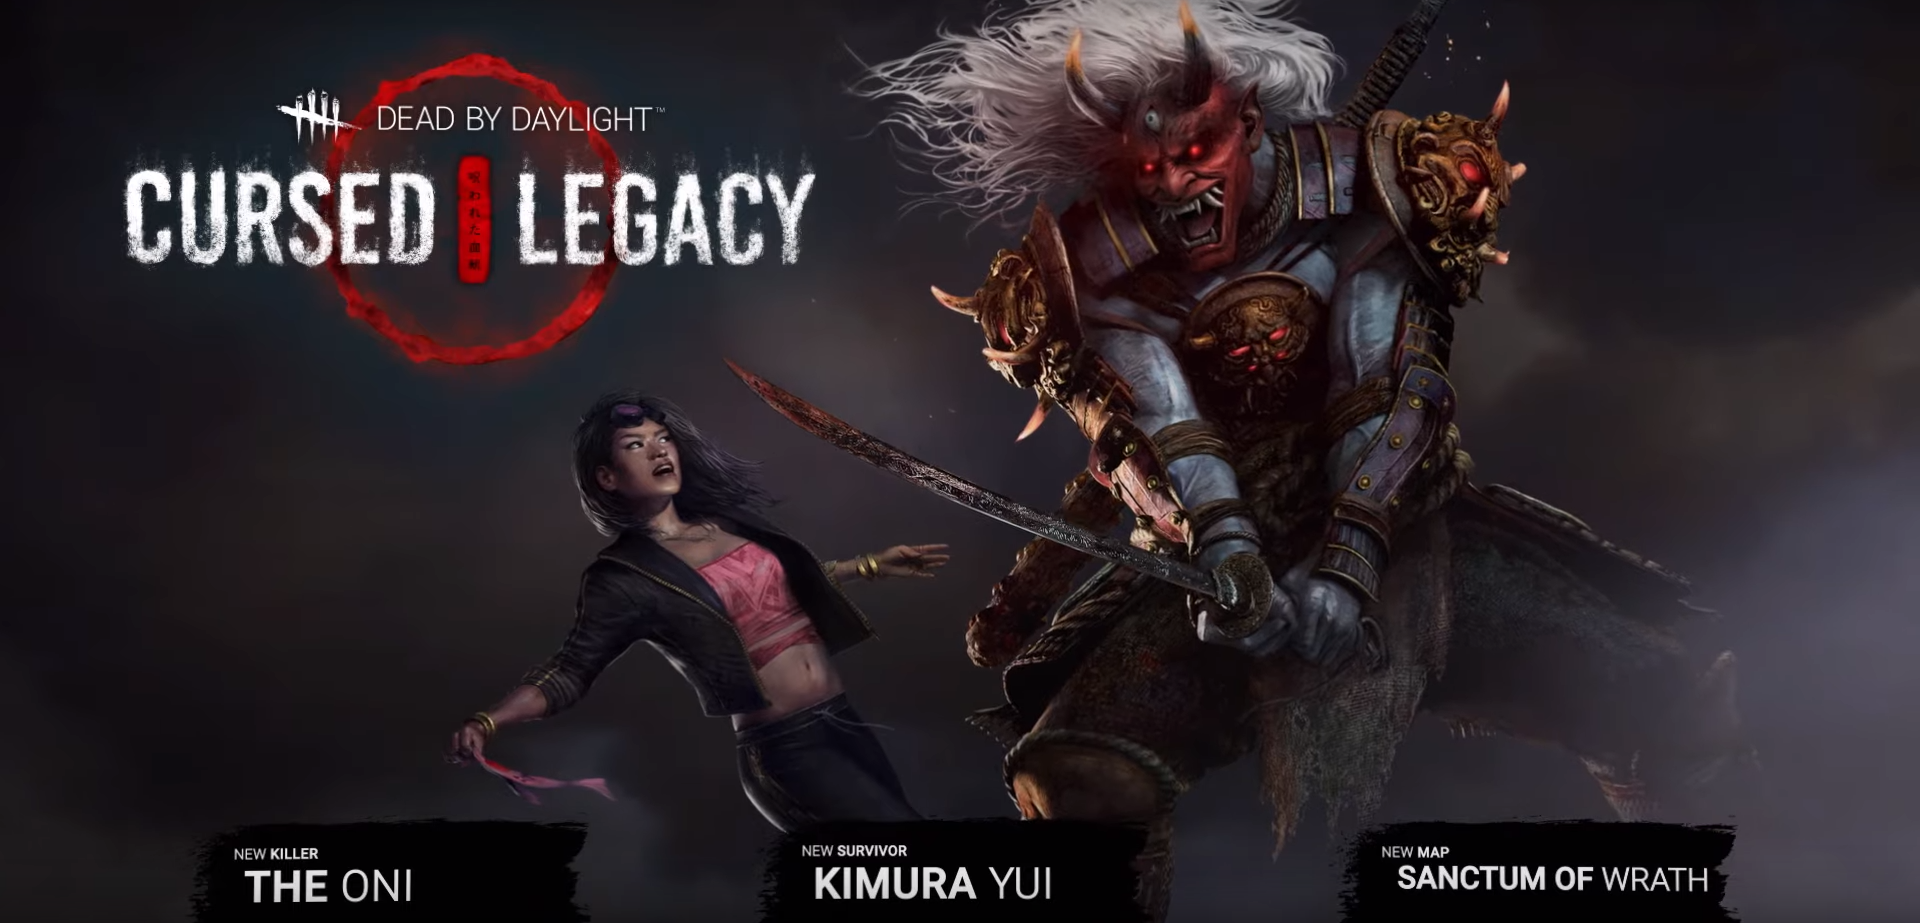 Dead By Daylight 新キラー Oni 新サバイバー Kimura Yui 登場 久々の日本チャプターに Game Spark 国内 海外ゲーム情報サイト